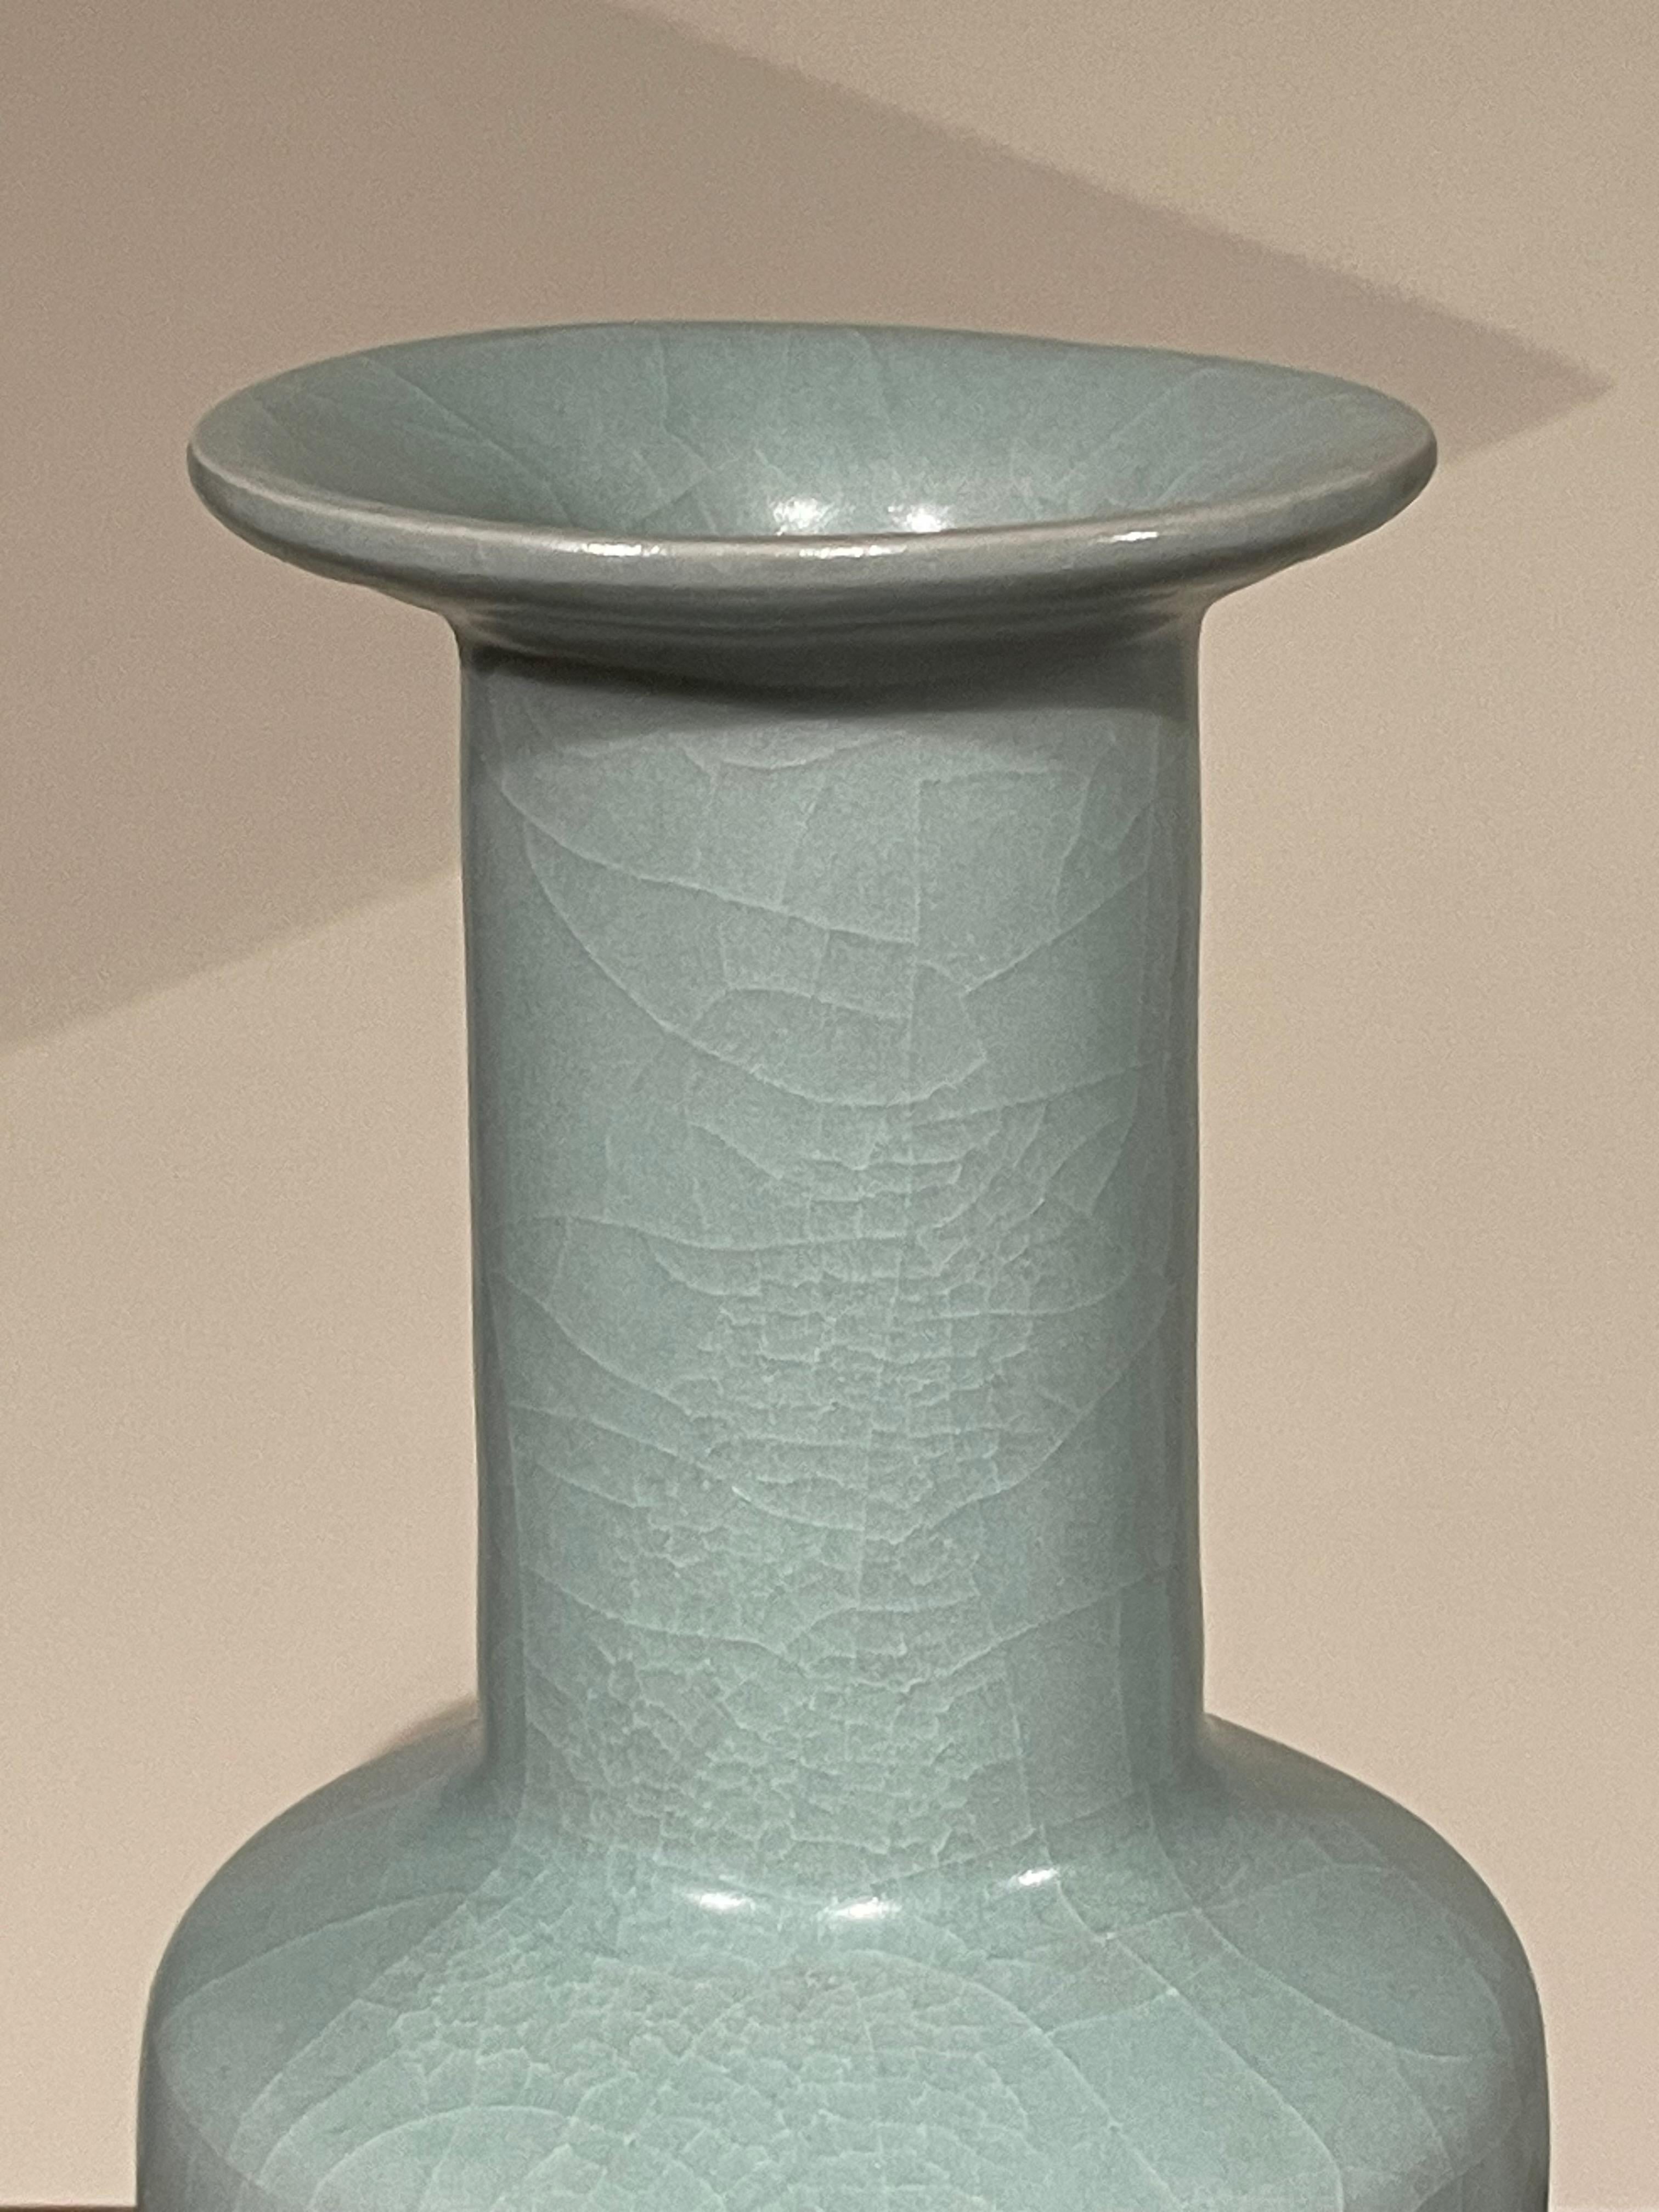 Contemporary Chinese pale turquoise vase.
Cylinder shaped bottom.
Large collection available with varying sizes and shapes.
ARRIVING MARCH